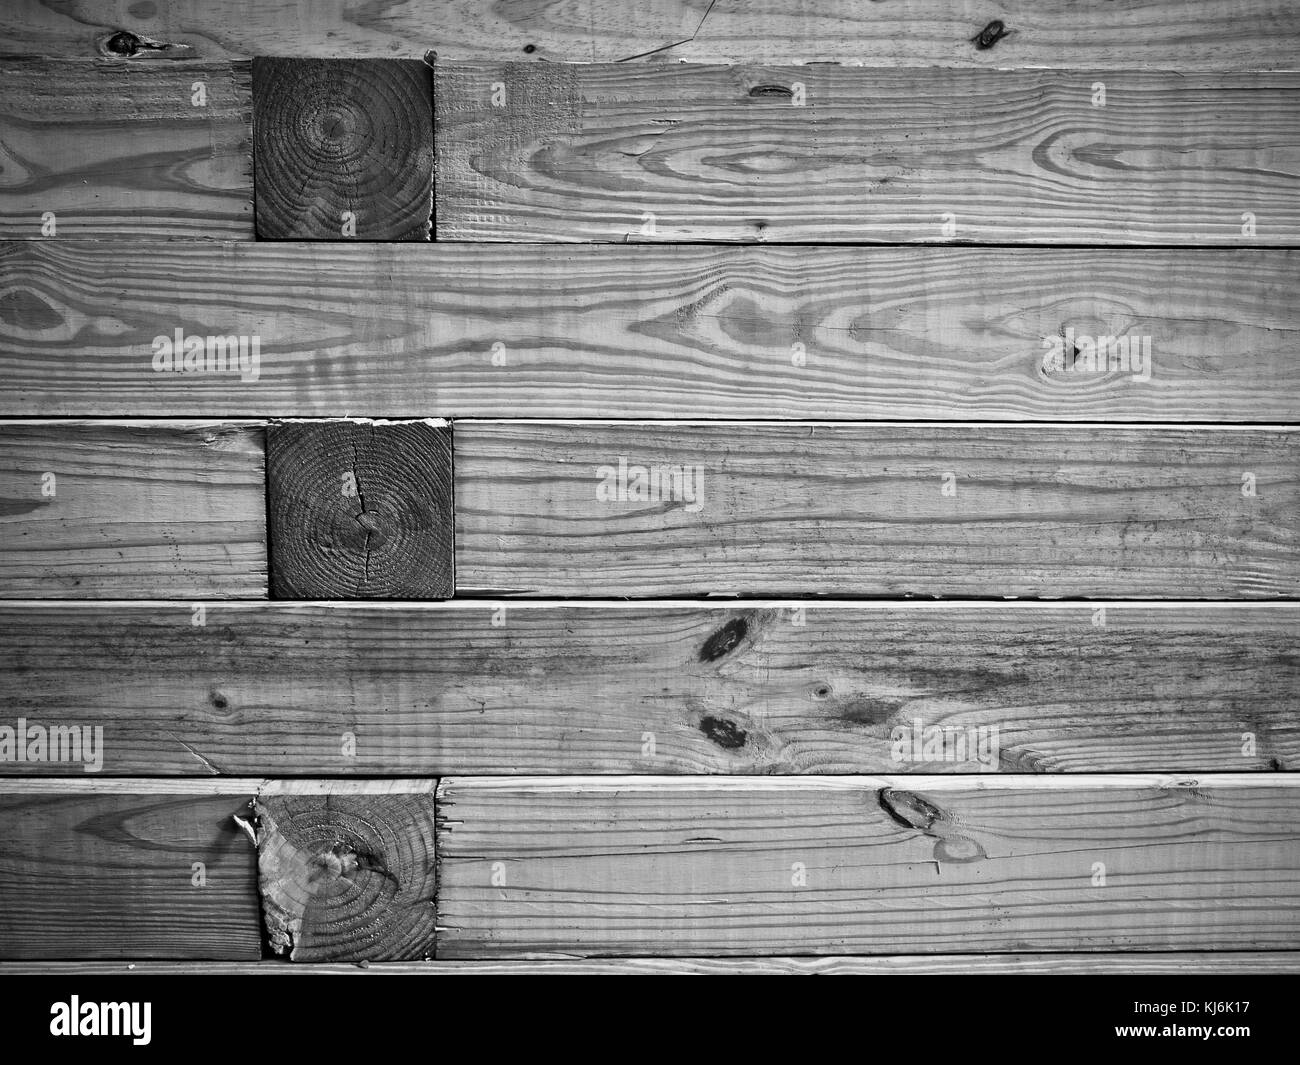 Wooden retaining wall of landscape timbers Stock Photo